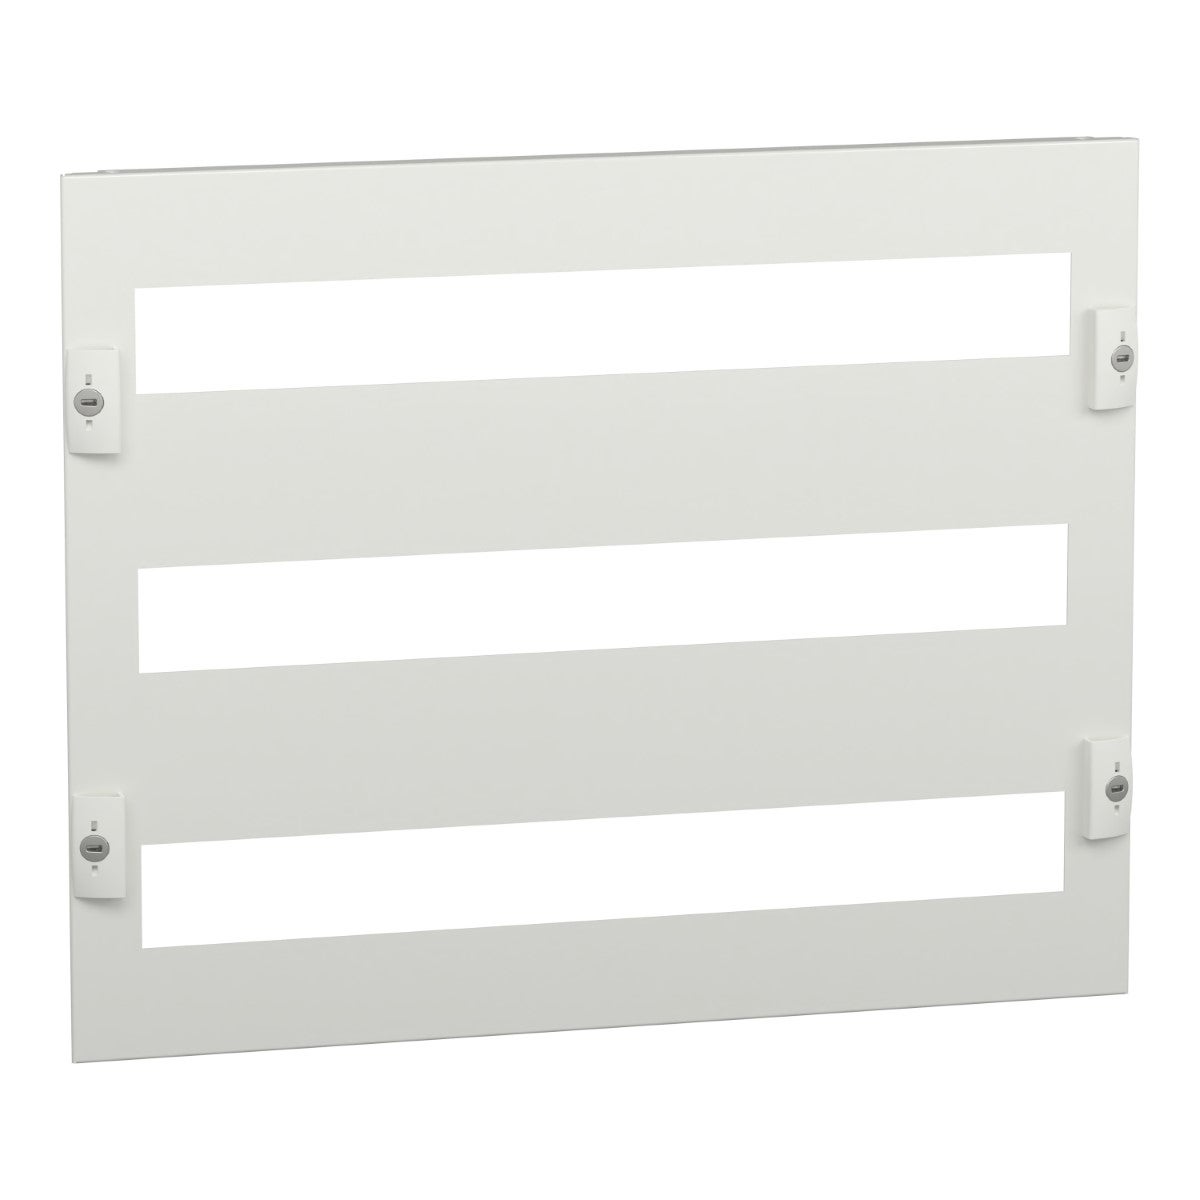 FRONT PLATE 3 MODULAR ROWS W600/W650 8M